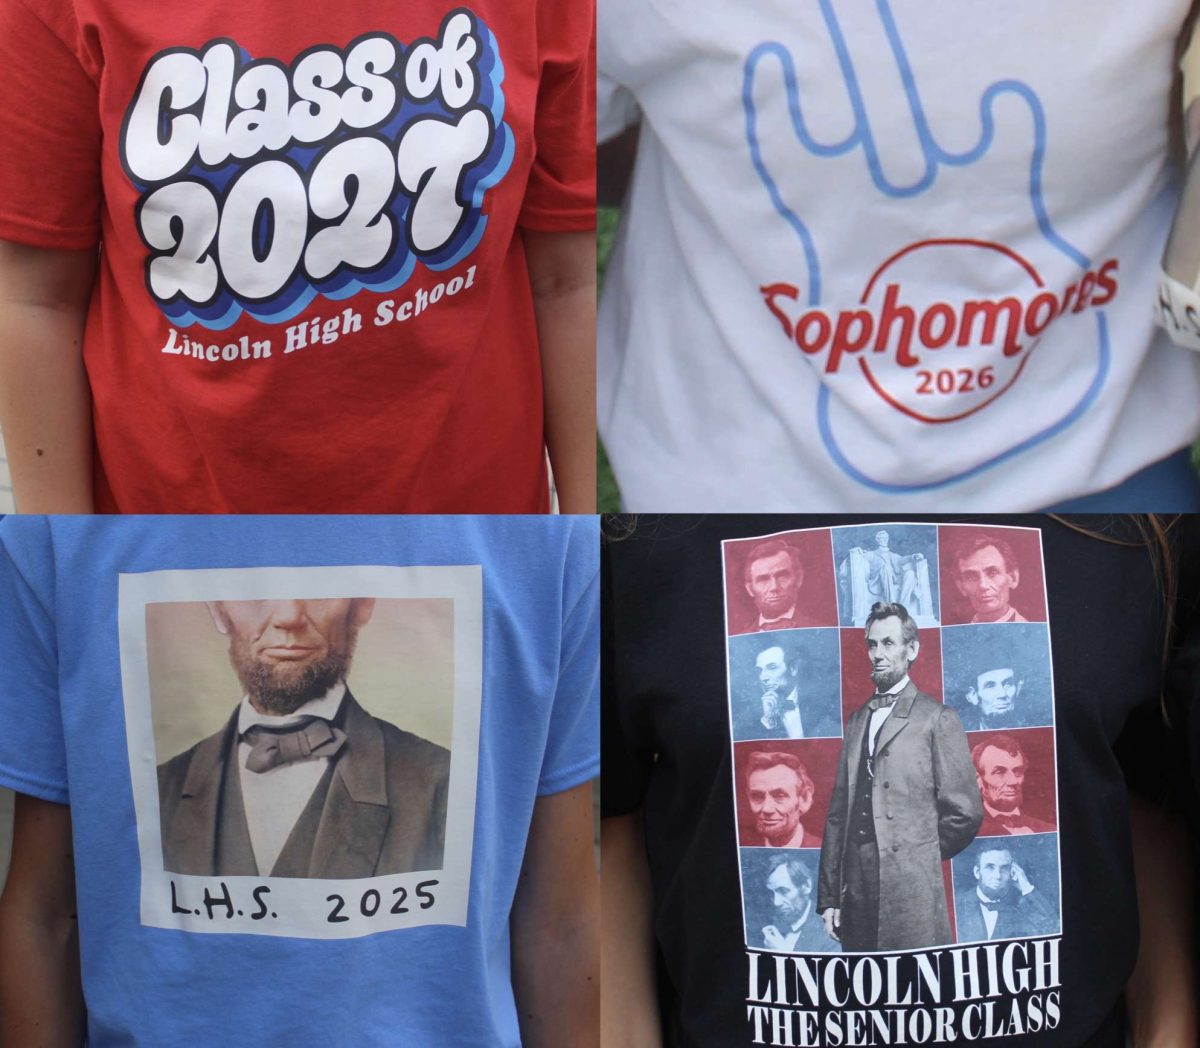 A member of every class repping their class t-shirts through the last day of homecoming on Friday, Sep. 15 and later that evening at the football game!